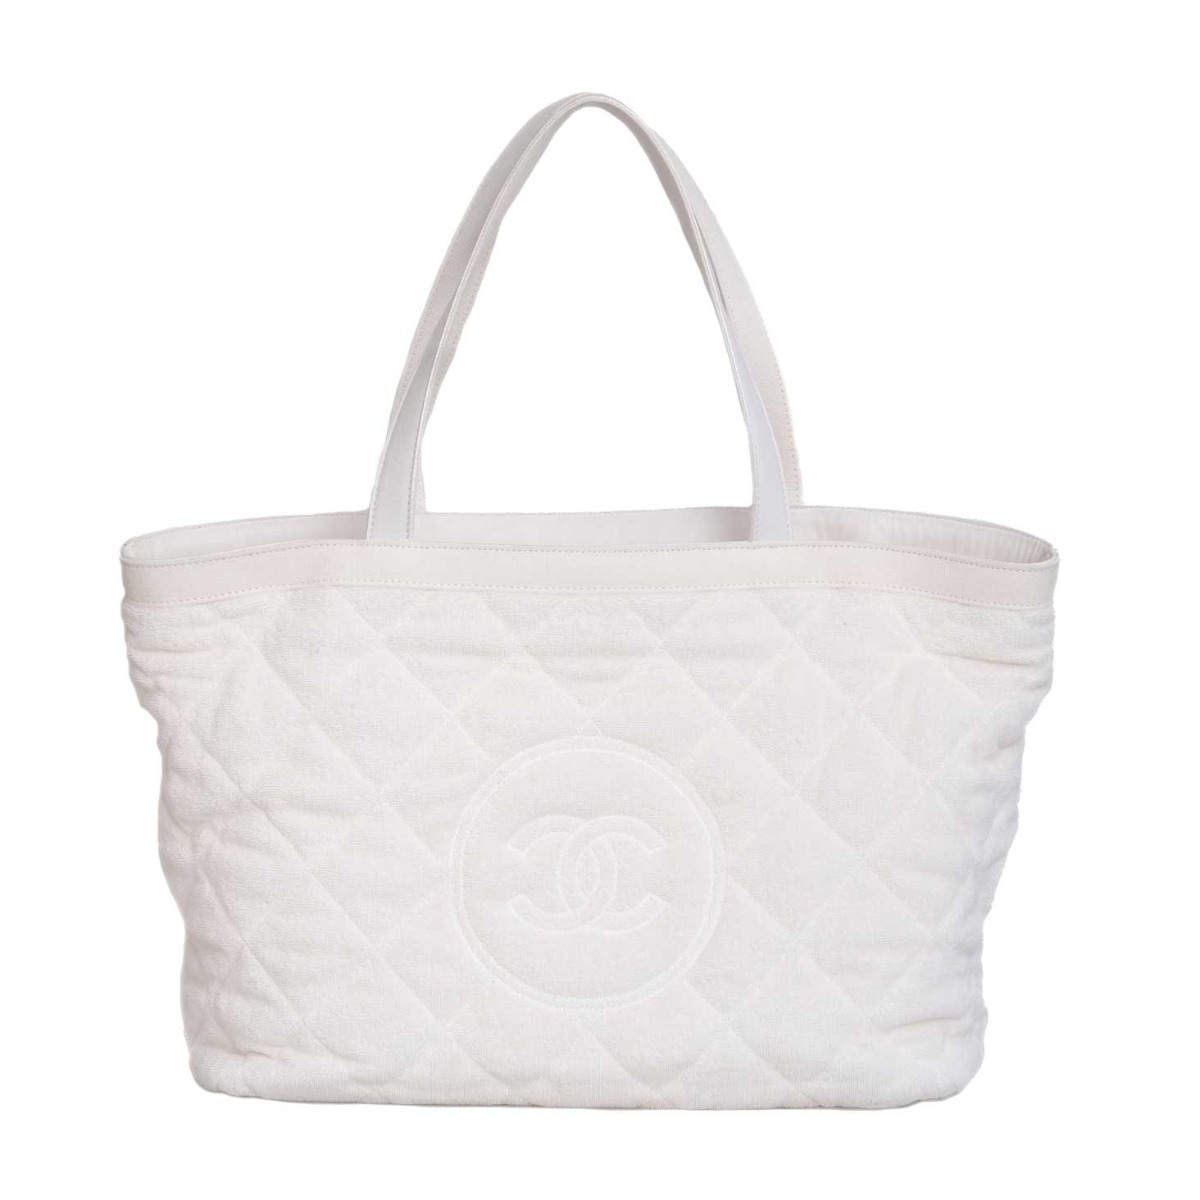 Chanel beach towel with matching bag  wwwchanelvintagenet